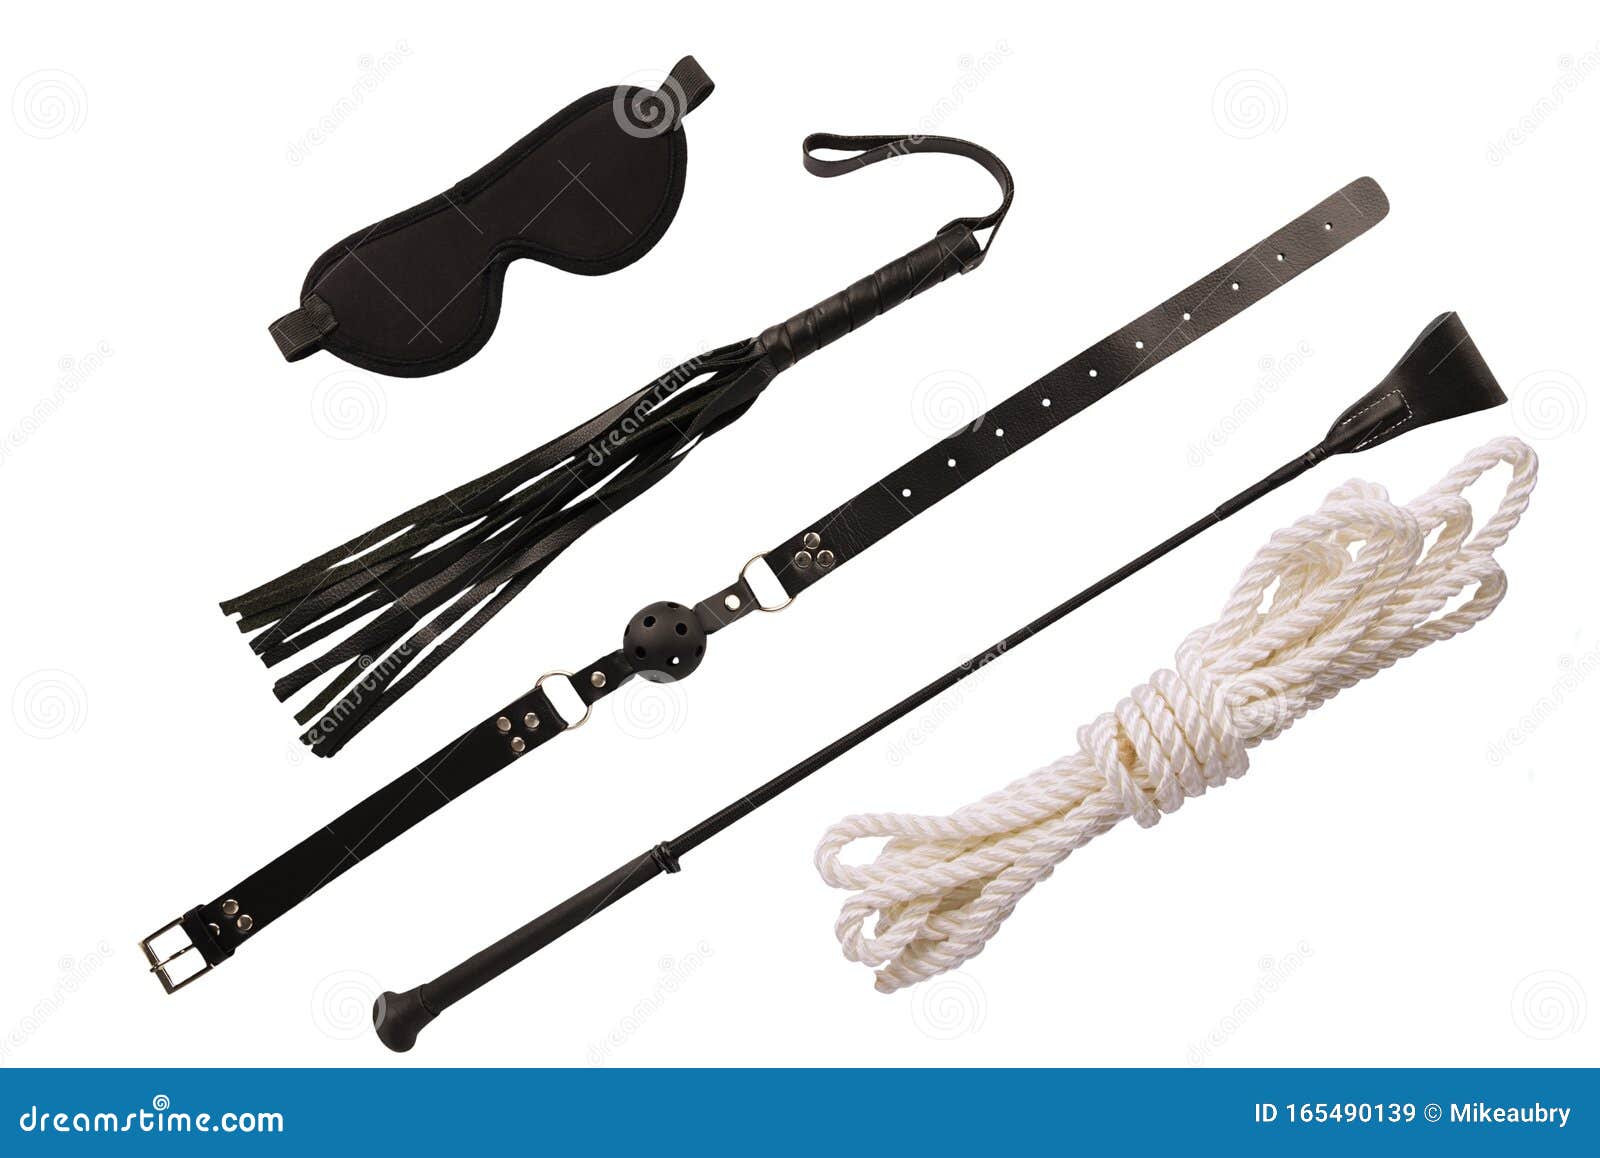 Blindfold Mask, Riding Crop and a Ball Gag, Isolated